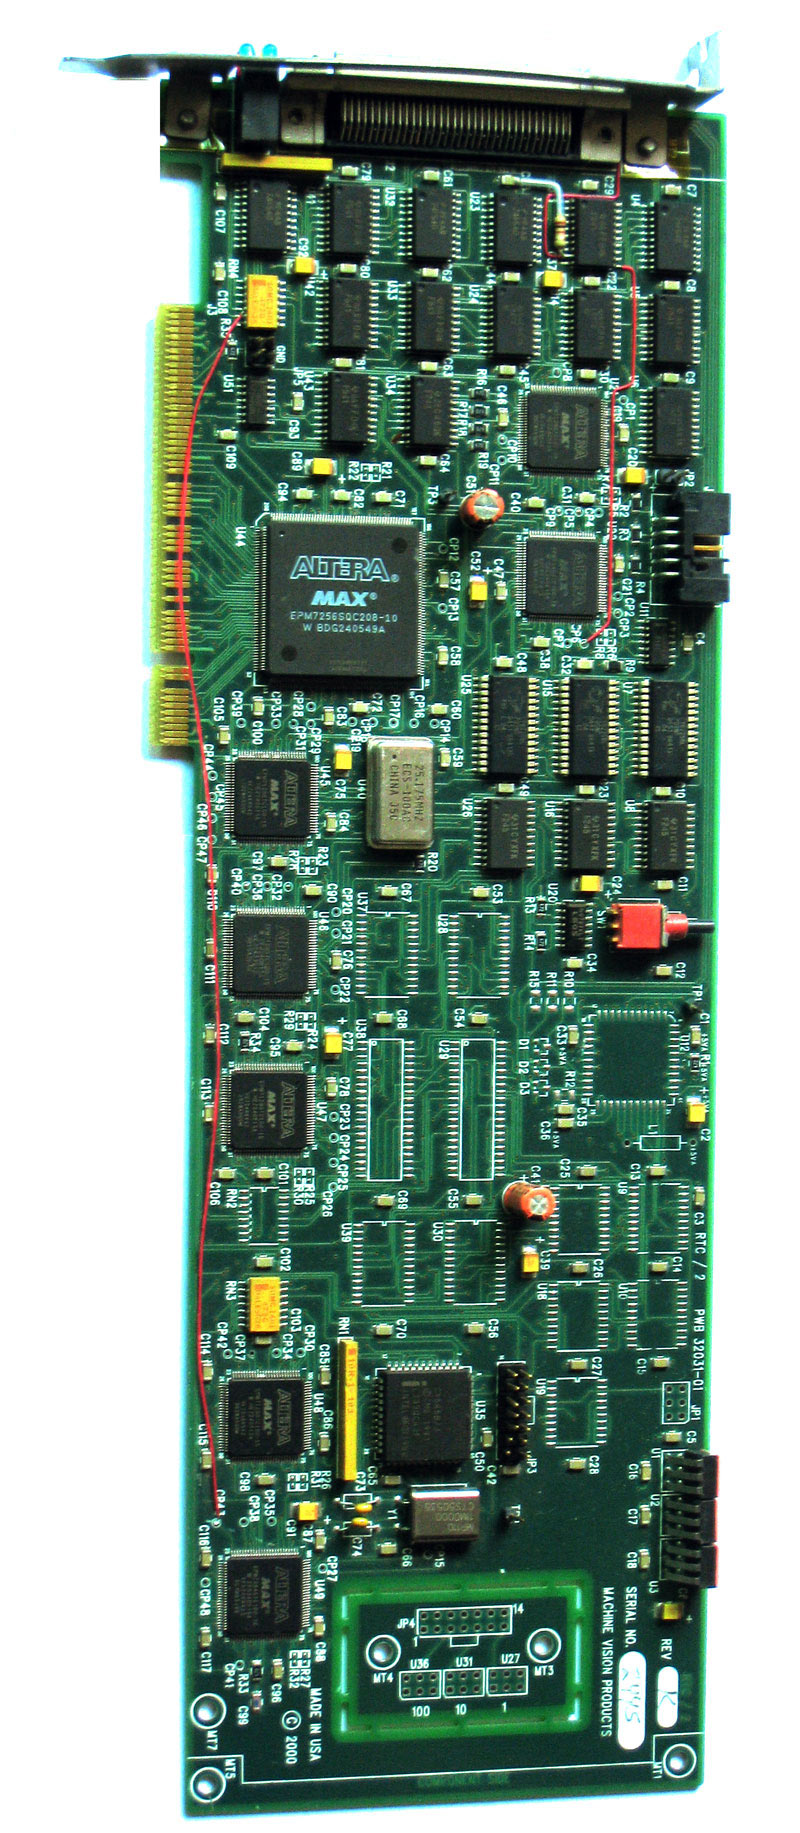 machine_vision_products card